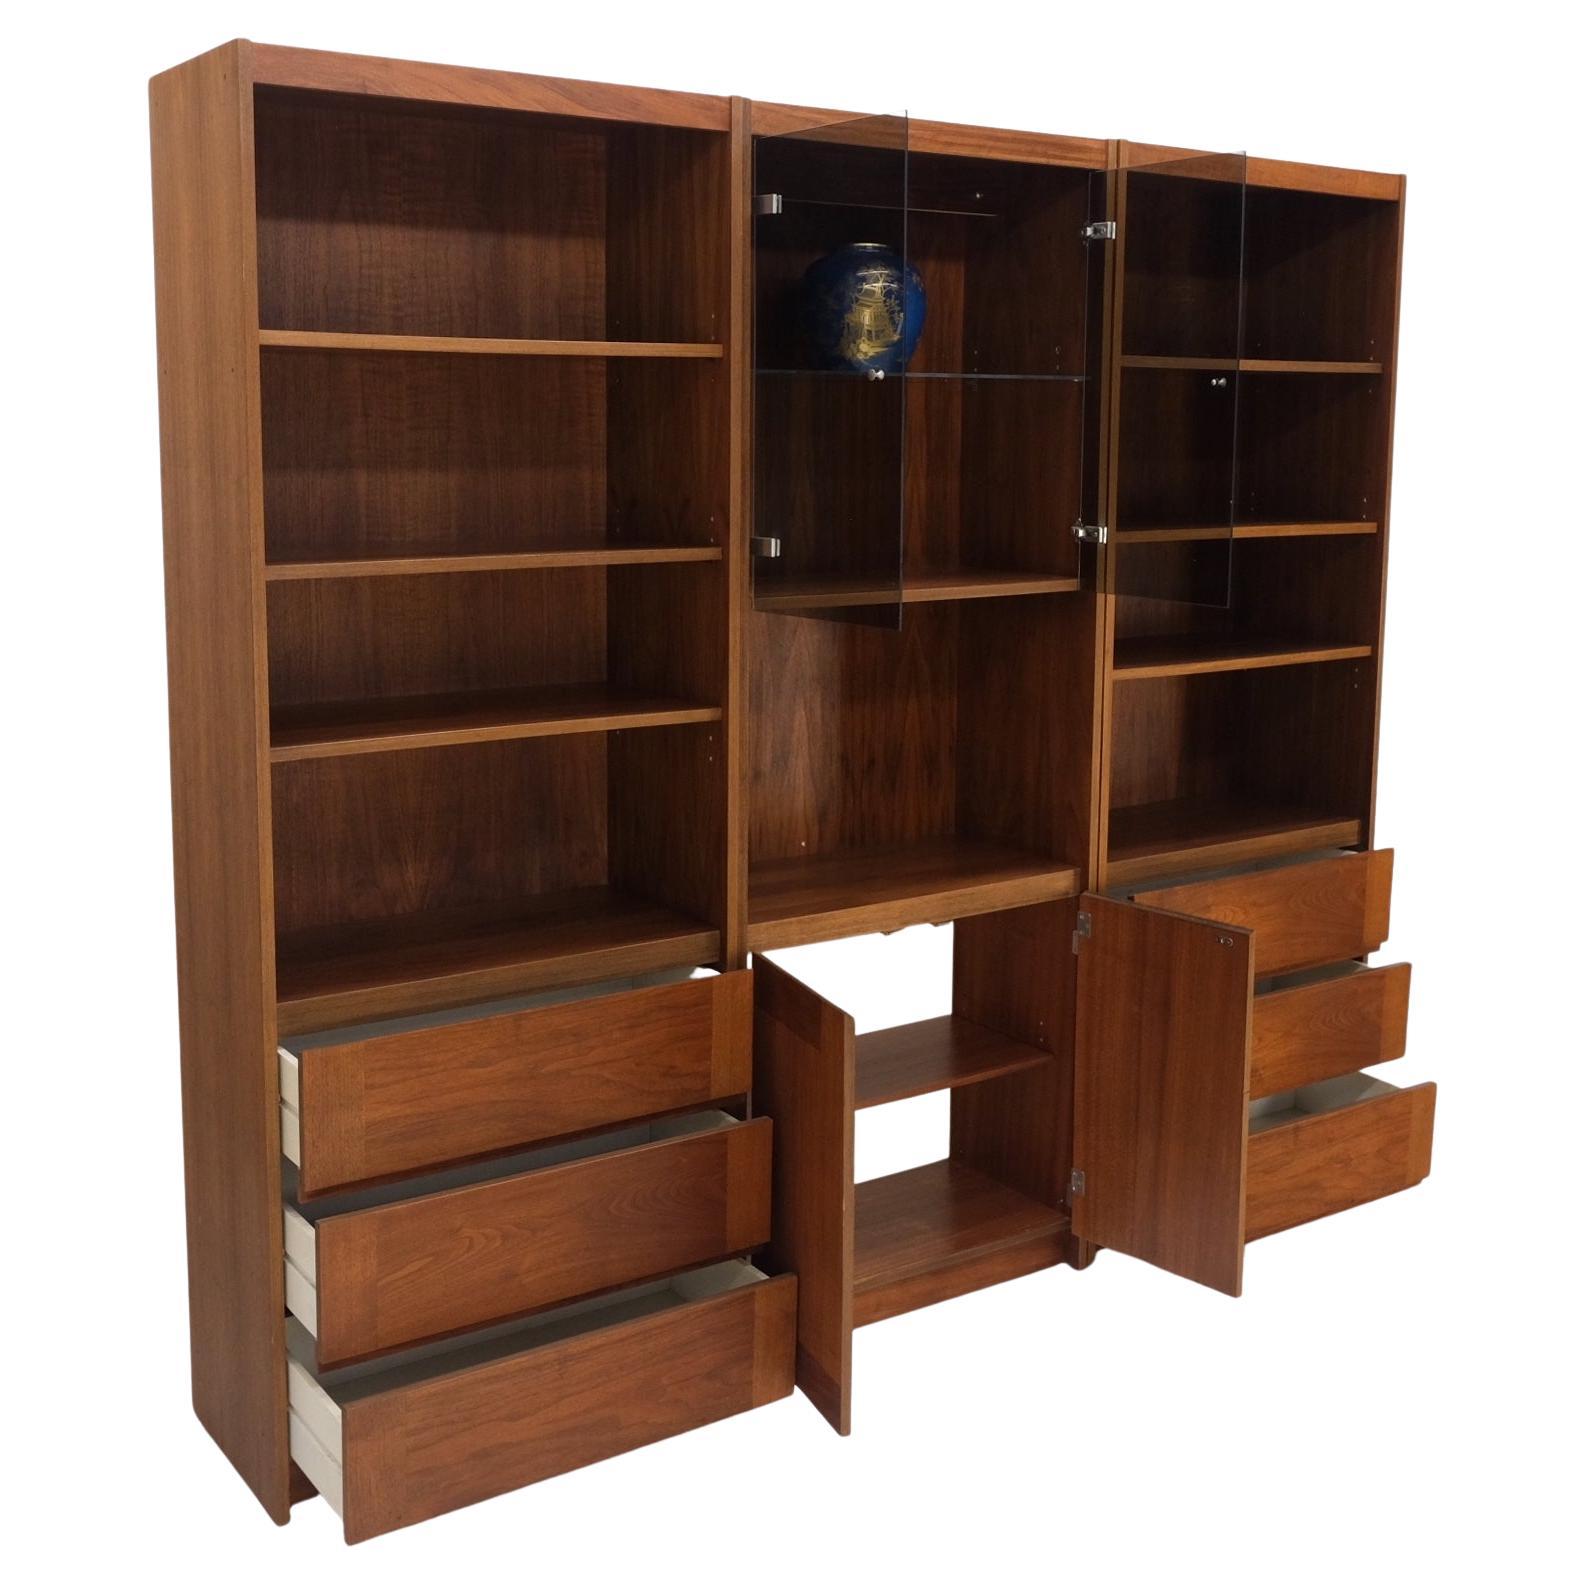 3 Bay Mid-Century Modern walnut glass doors bookcase wall shelves unit Curio cabinet MINT!. 
Each section mesures 30 inches in width.